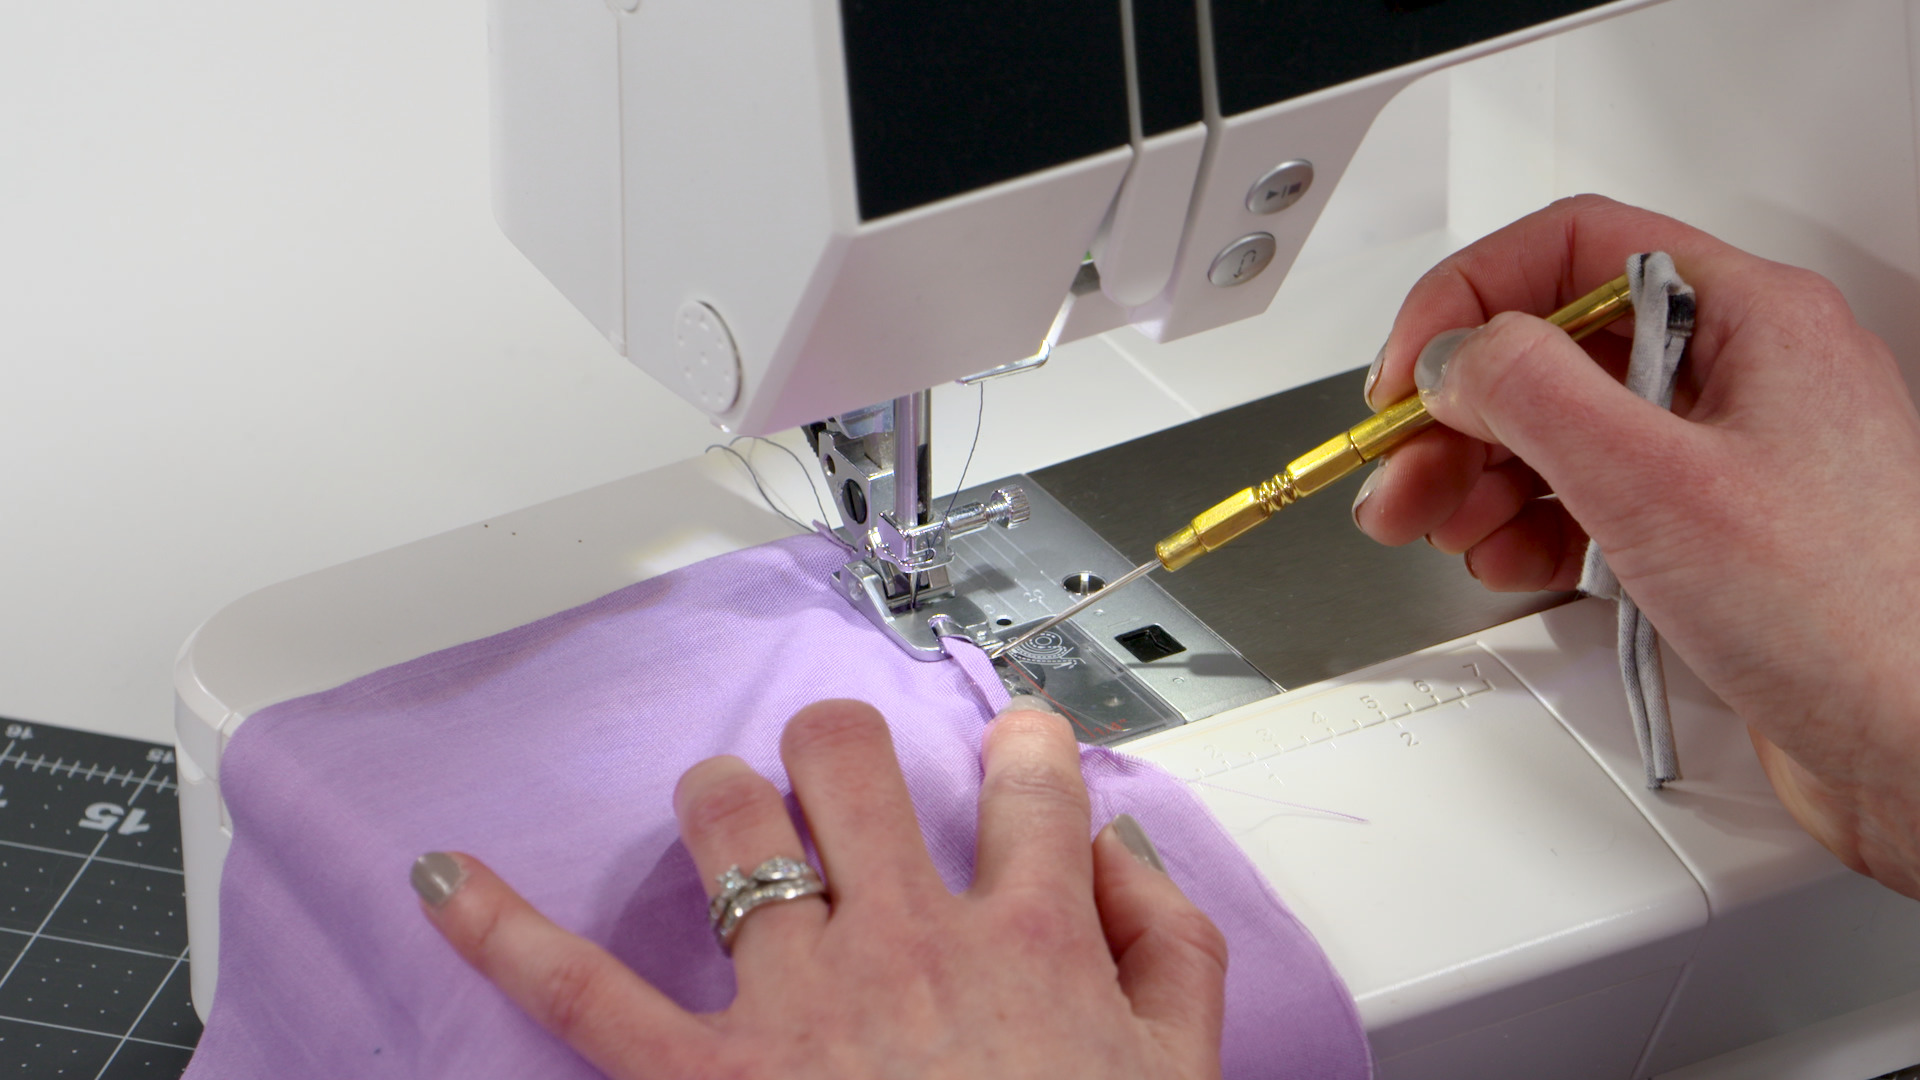 15 Tips to Improve Your Sewing, Blog